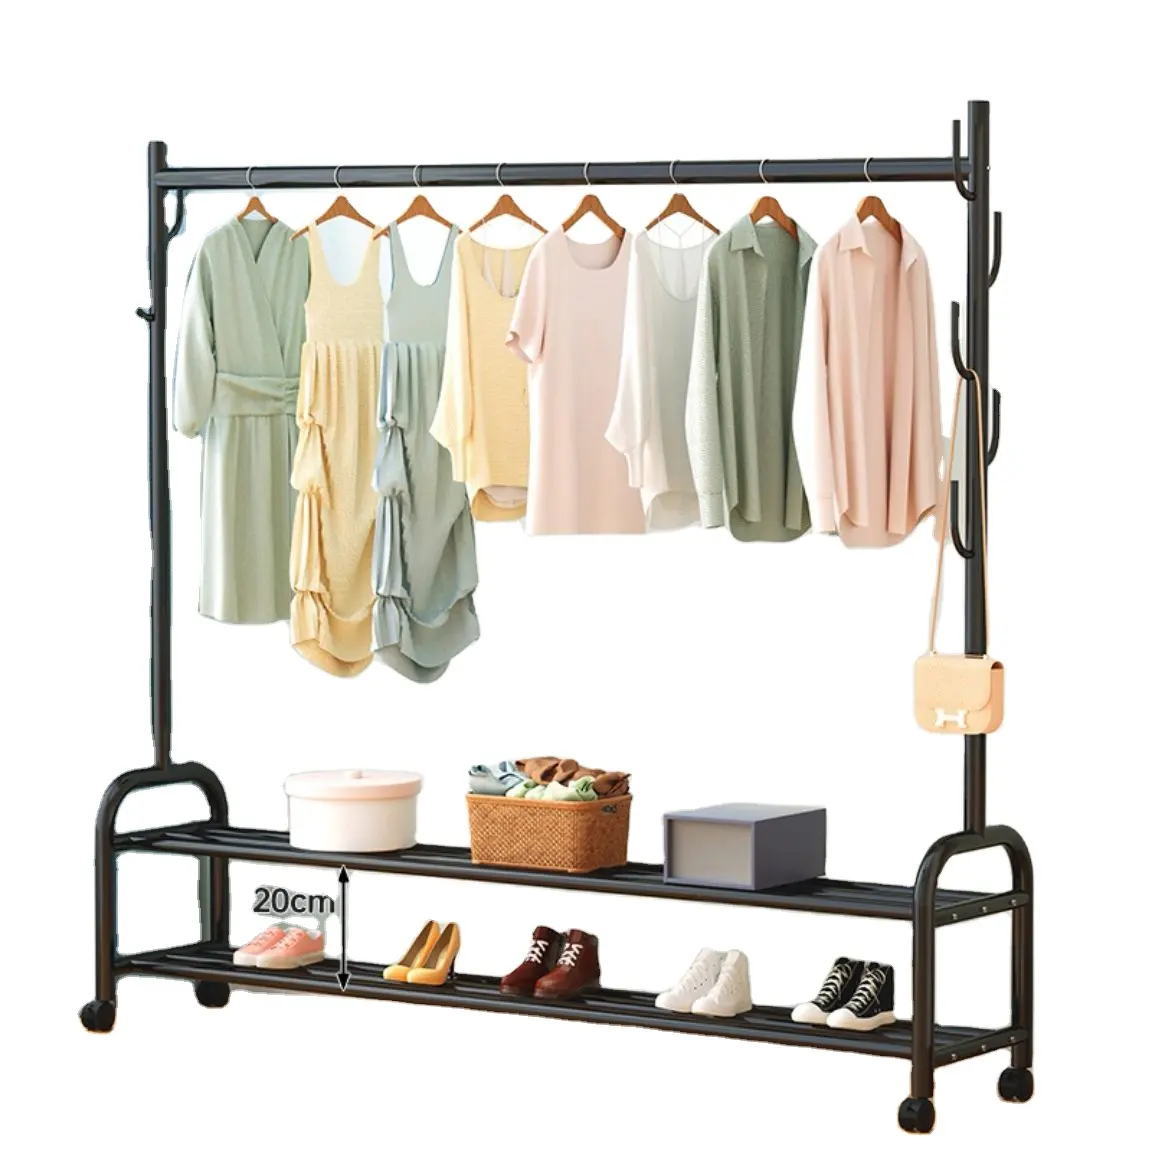 Household multi-functional drying clothes rack floor indoor drying clothes rack balcony bedroom hanging shelf simple single pole